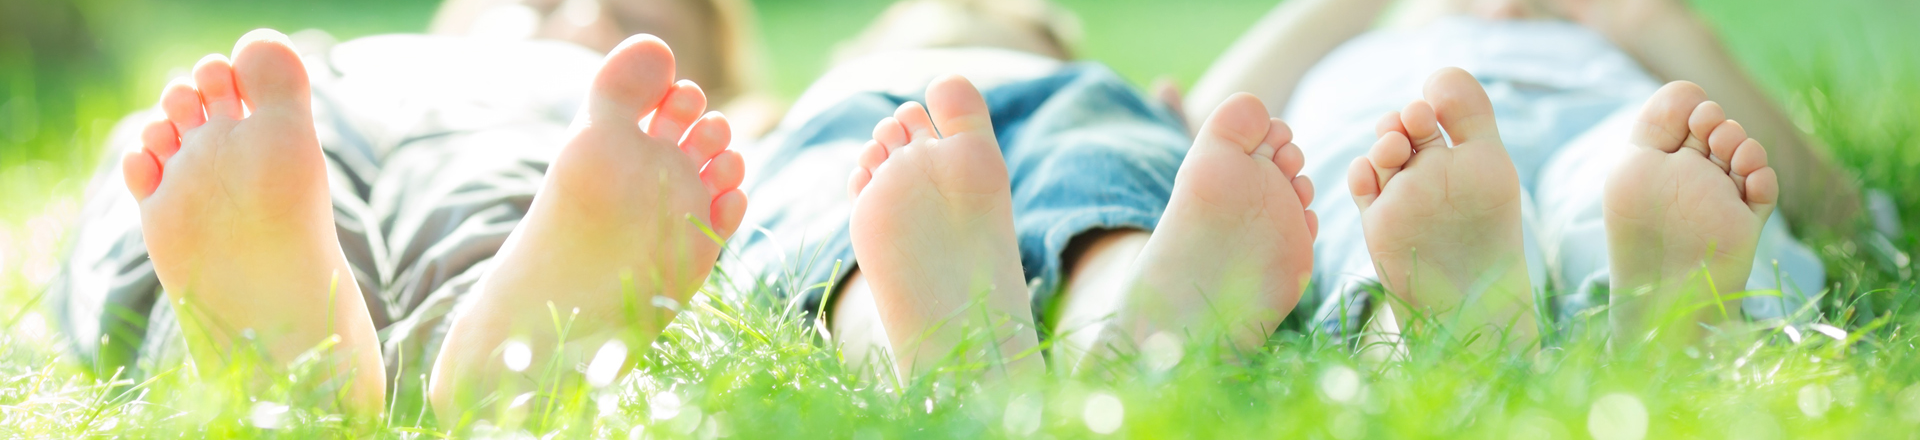 children lay in the grass earthing with barefeet